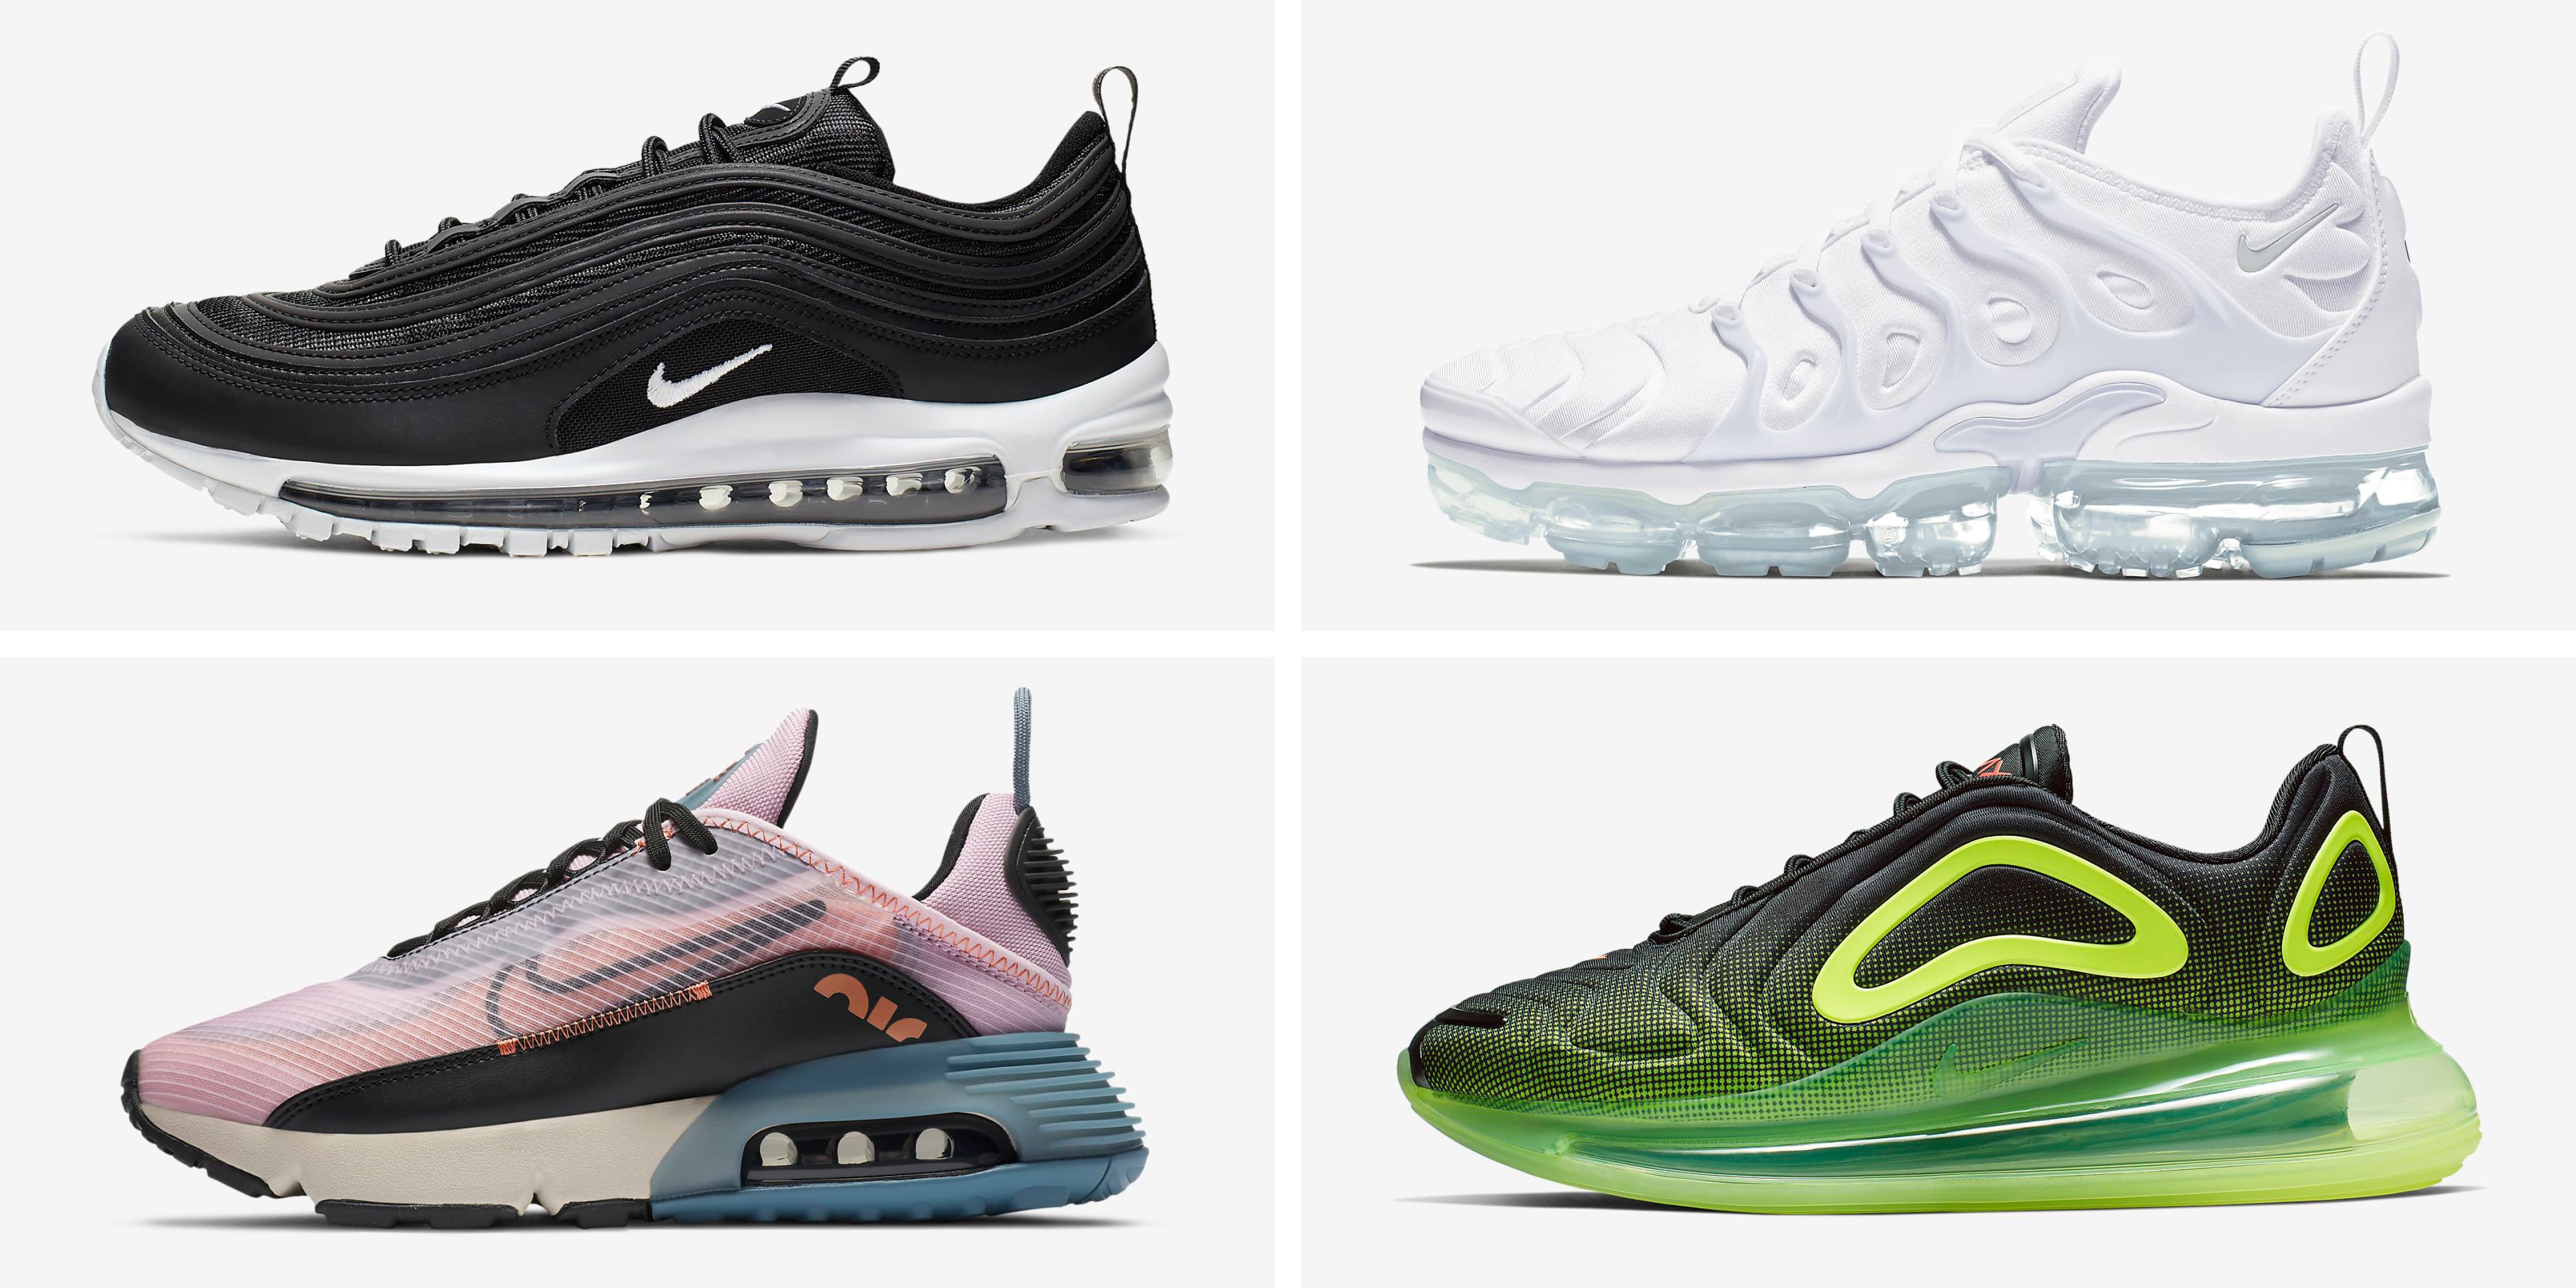 Best Nike Air Max Shoes 2021 | Air Max Releases and Deals صور الماش